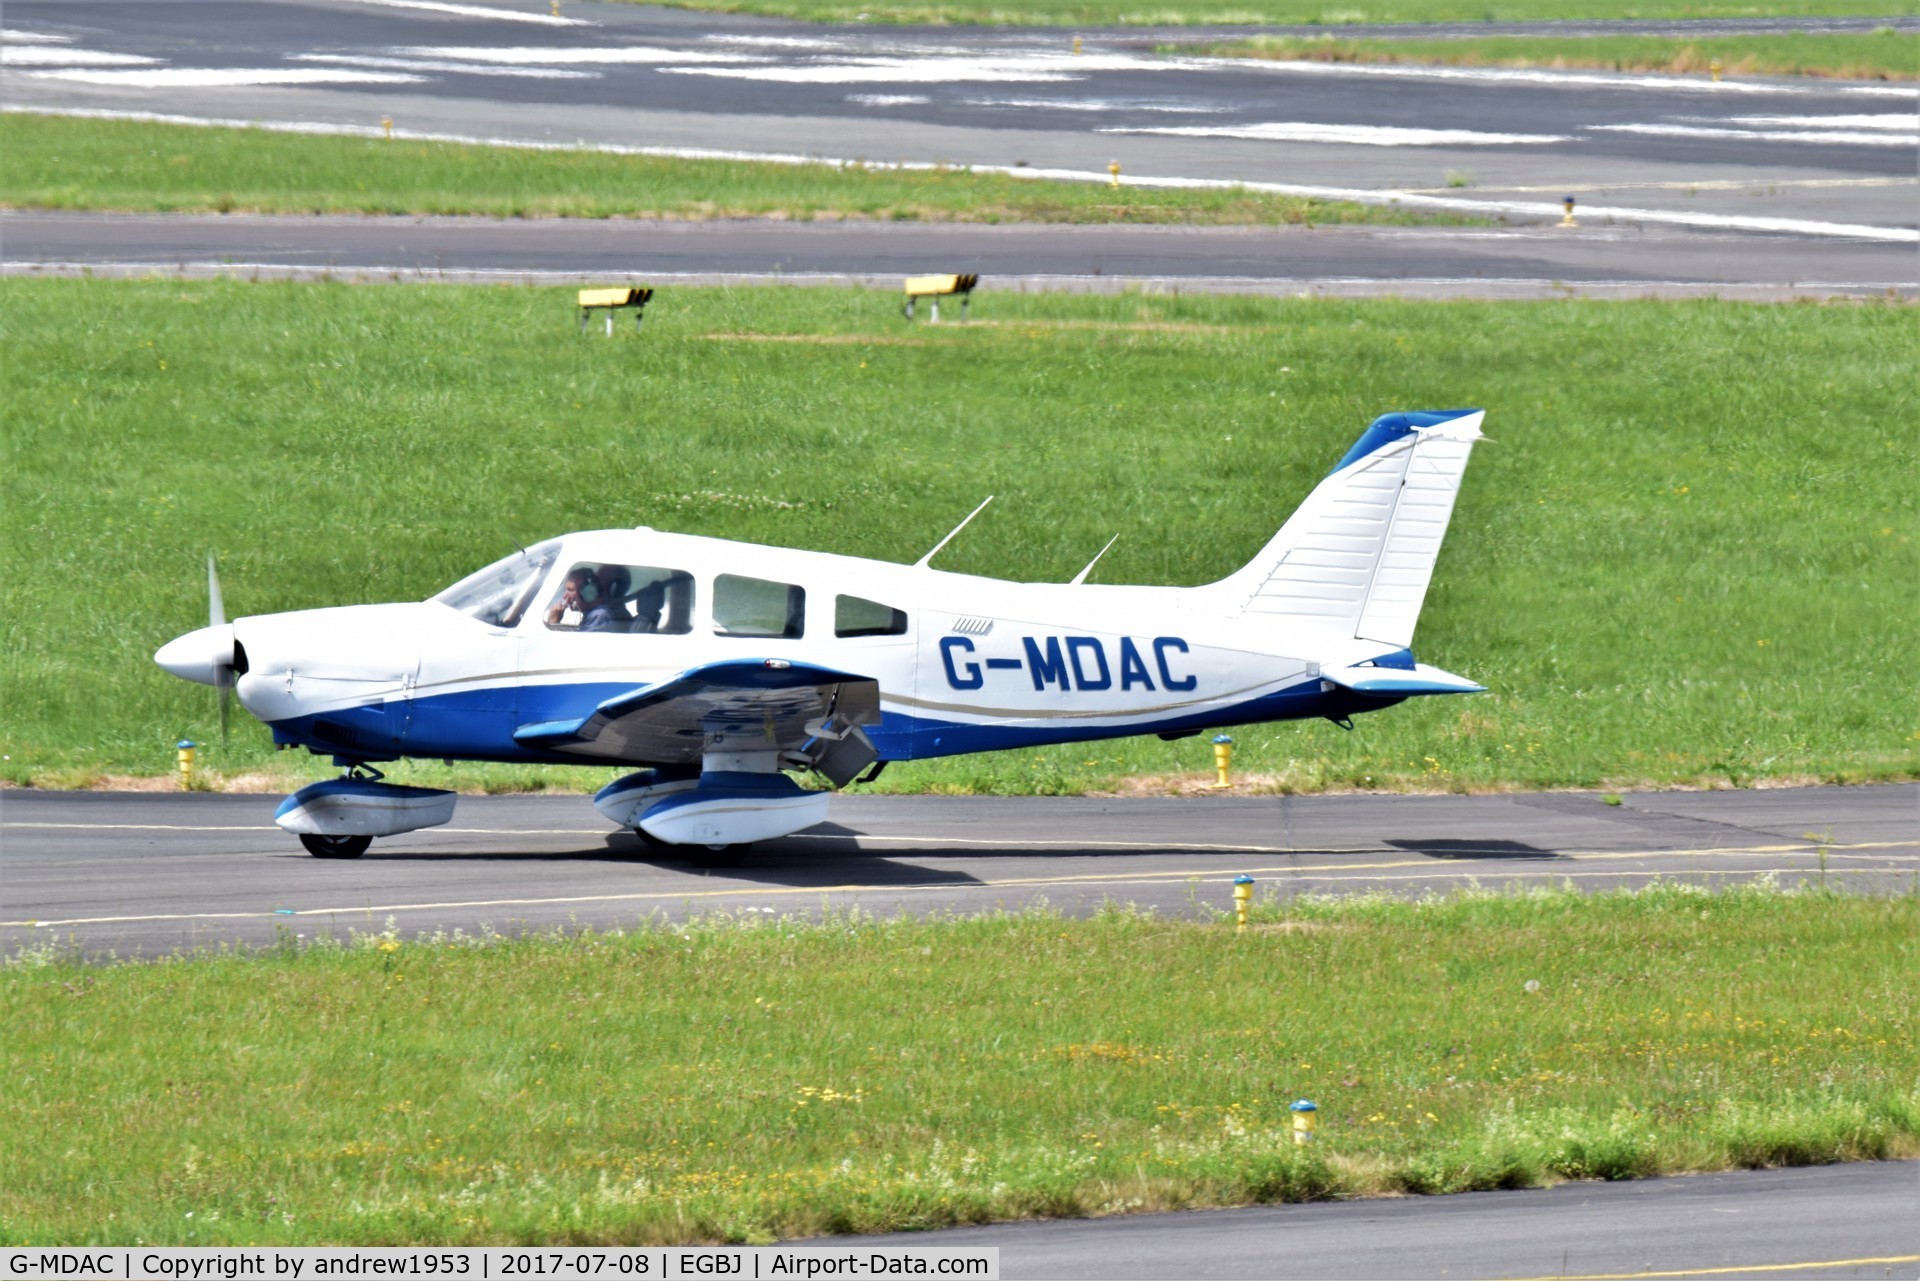 G-MDAC, 1982 Piper PA-28-181 Cherokee Archer II C/N 28-8290154, G-MDAC at Gloucestershire Airport.